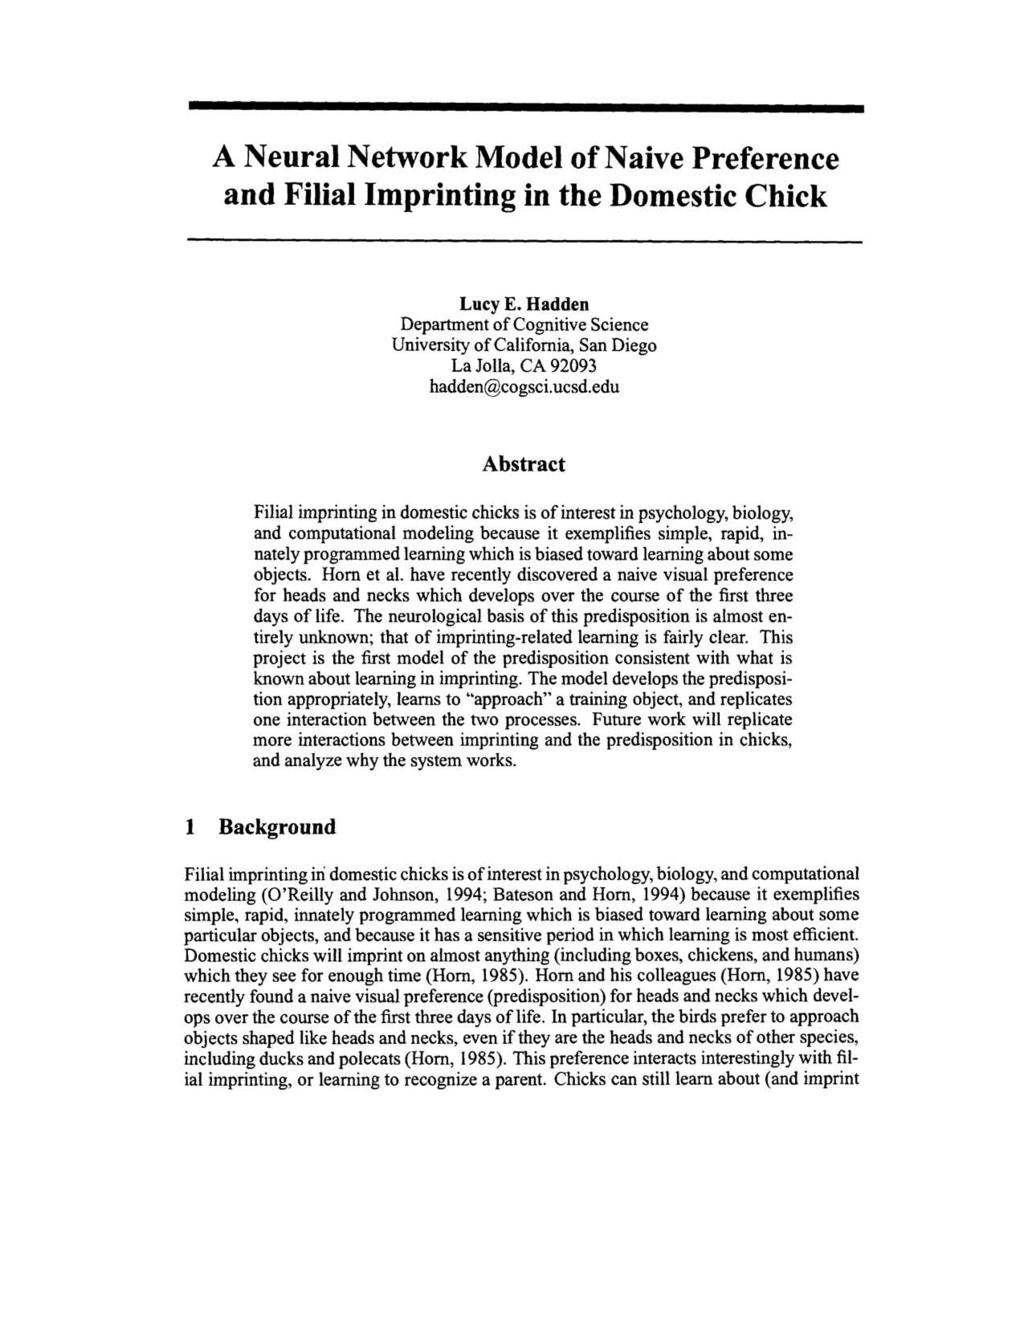 A Neural Network Model of Naive Preference and Filial Imprinting in the Domestic Chick Lucy E.